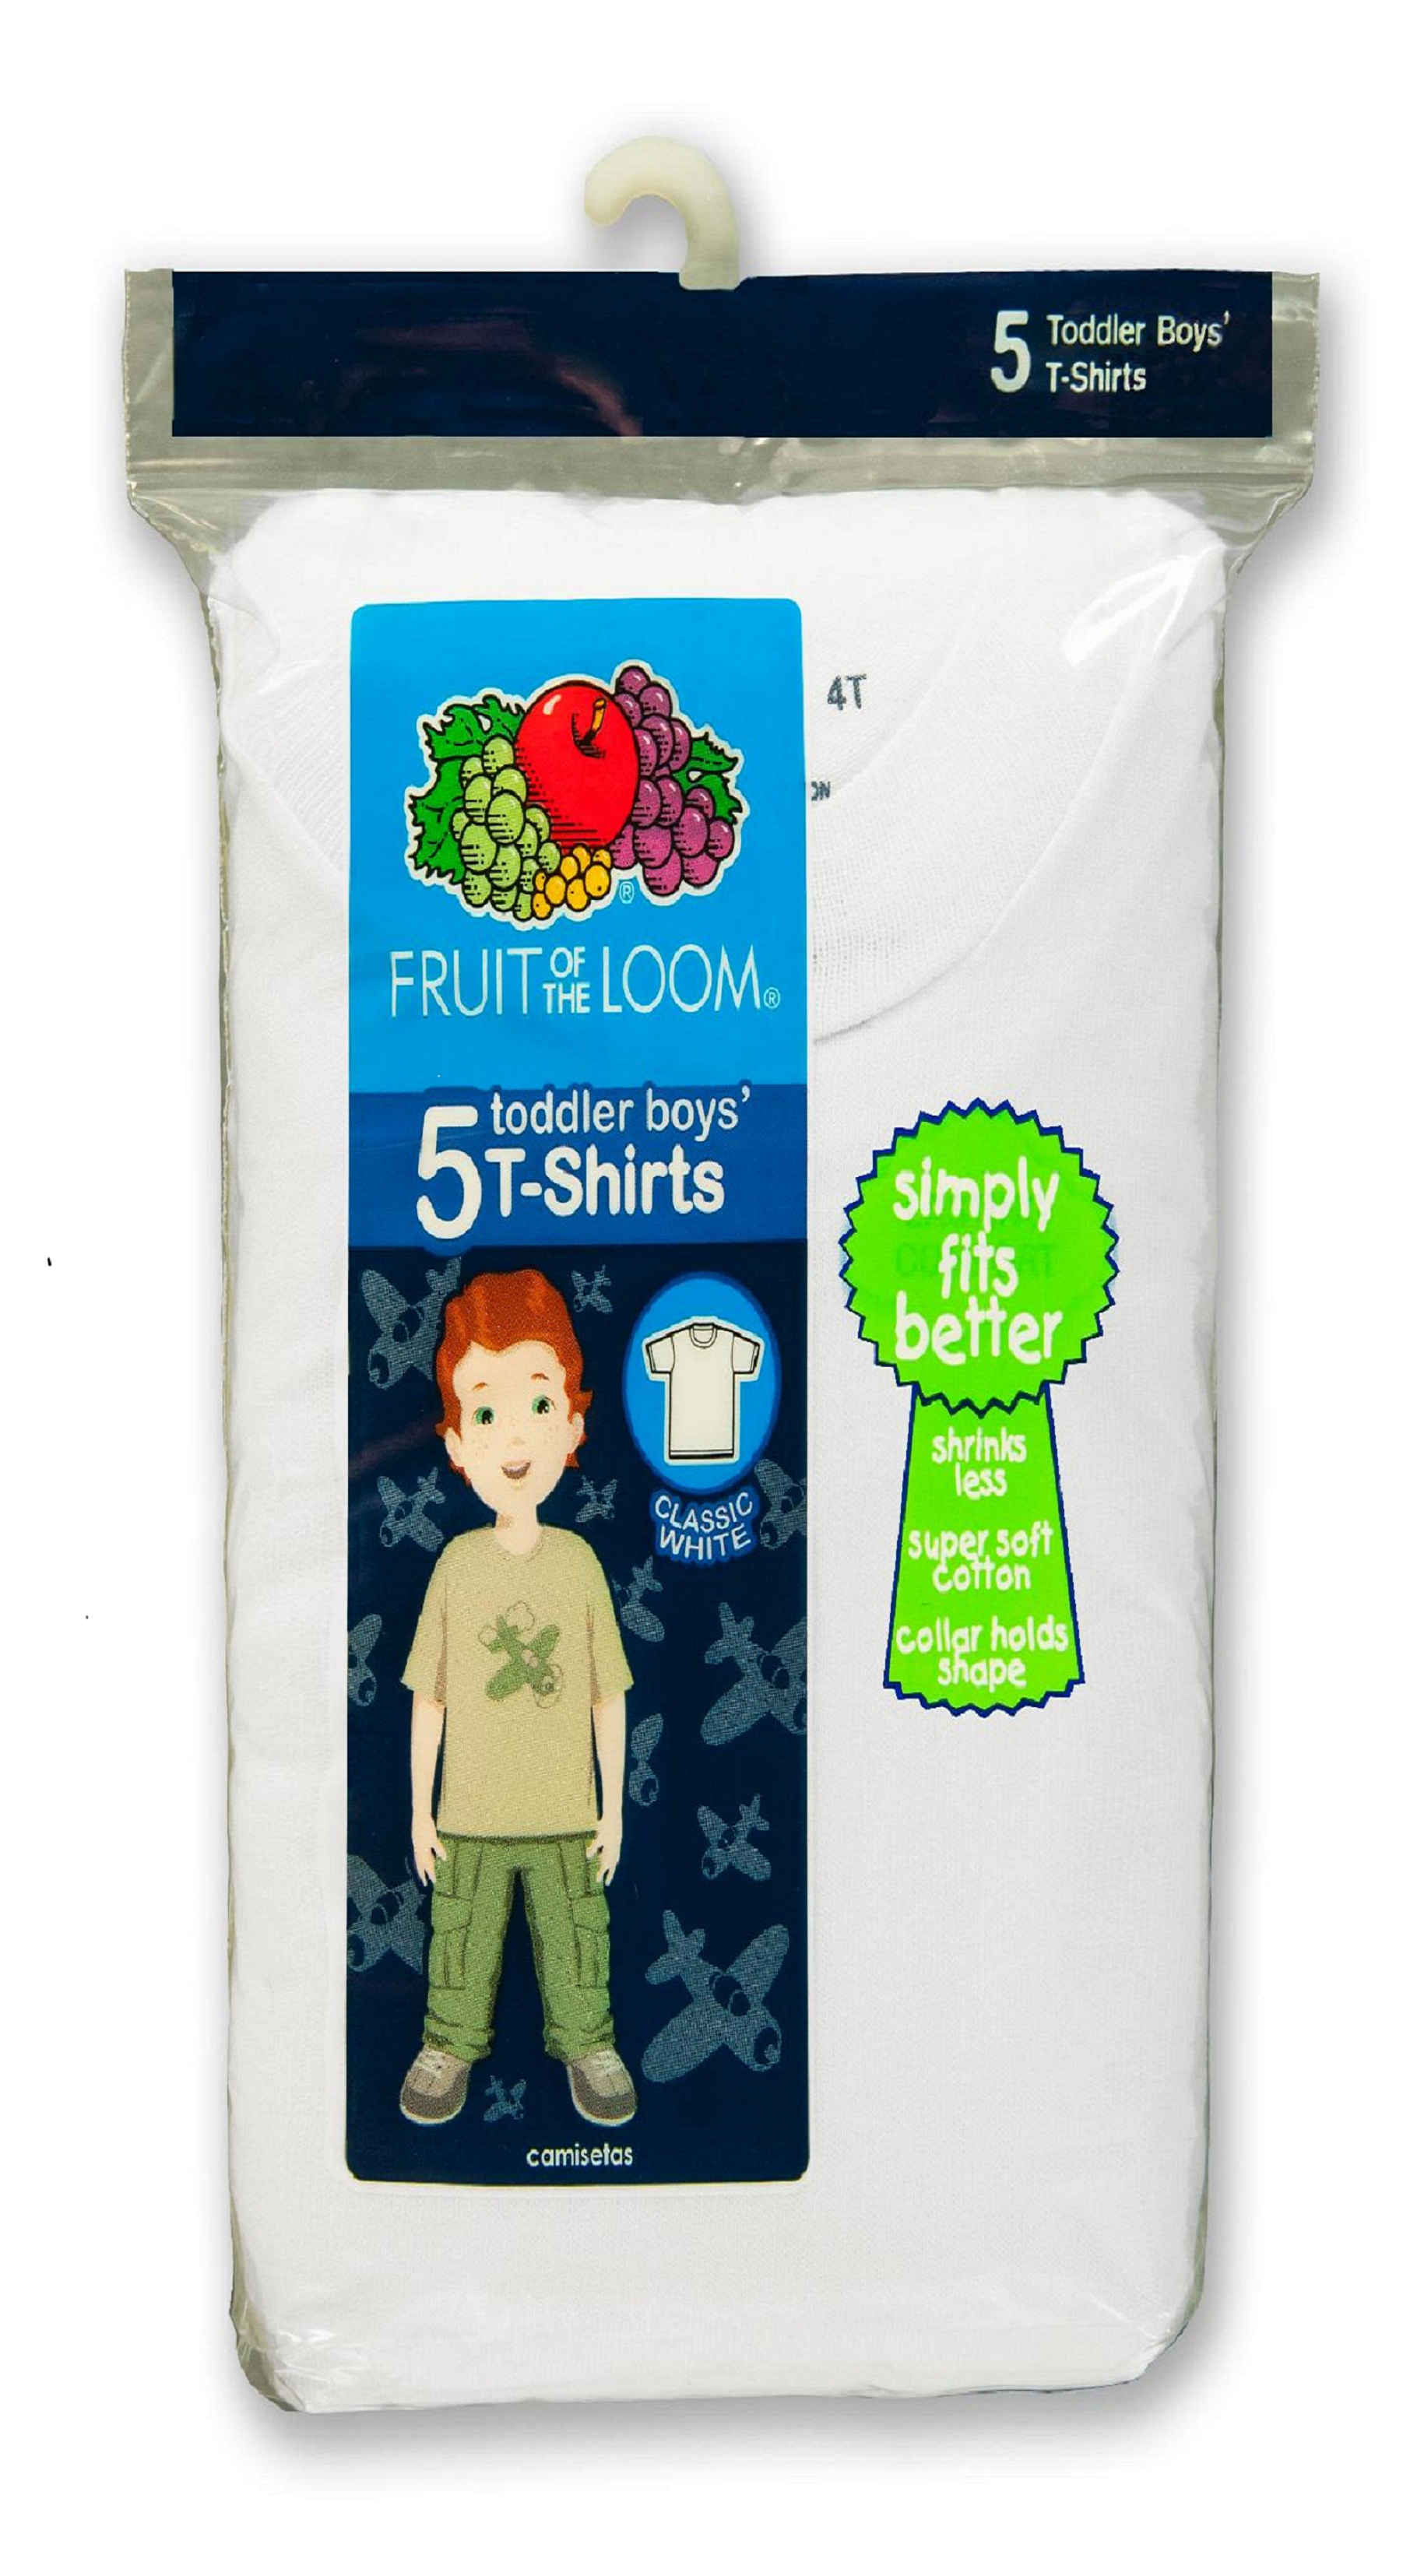 Fruit of the Loom Toddler Boy's 5-Pack Cotton Undershirts - T-Shirts